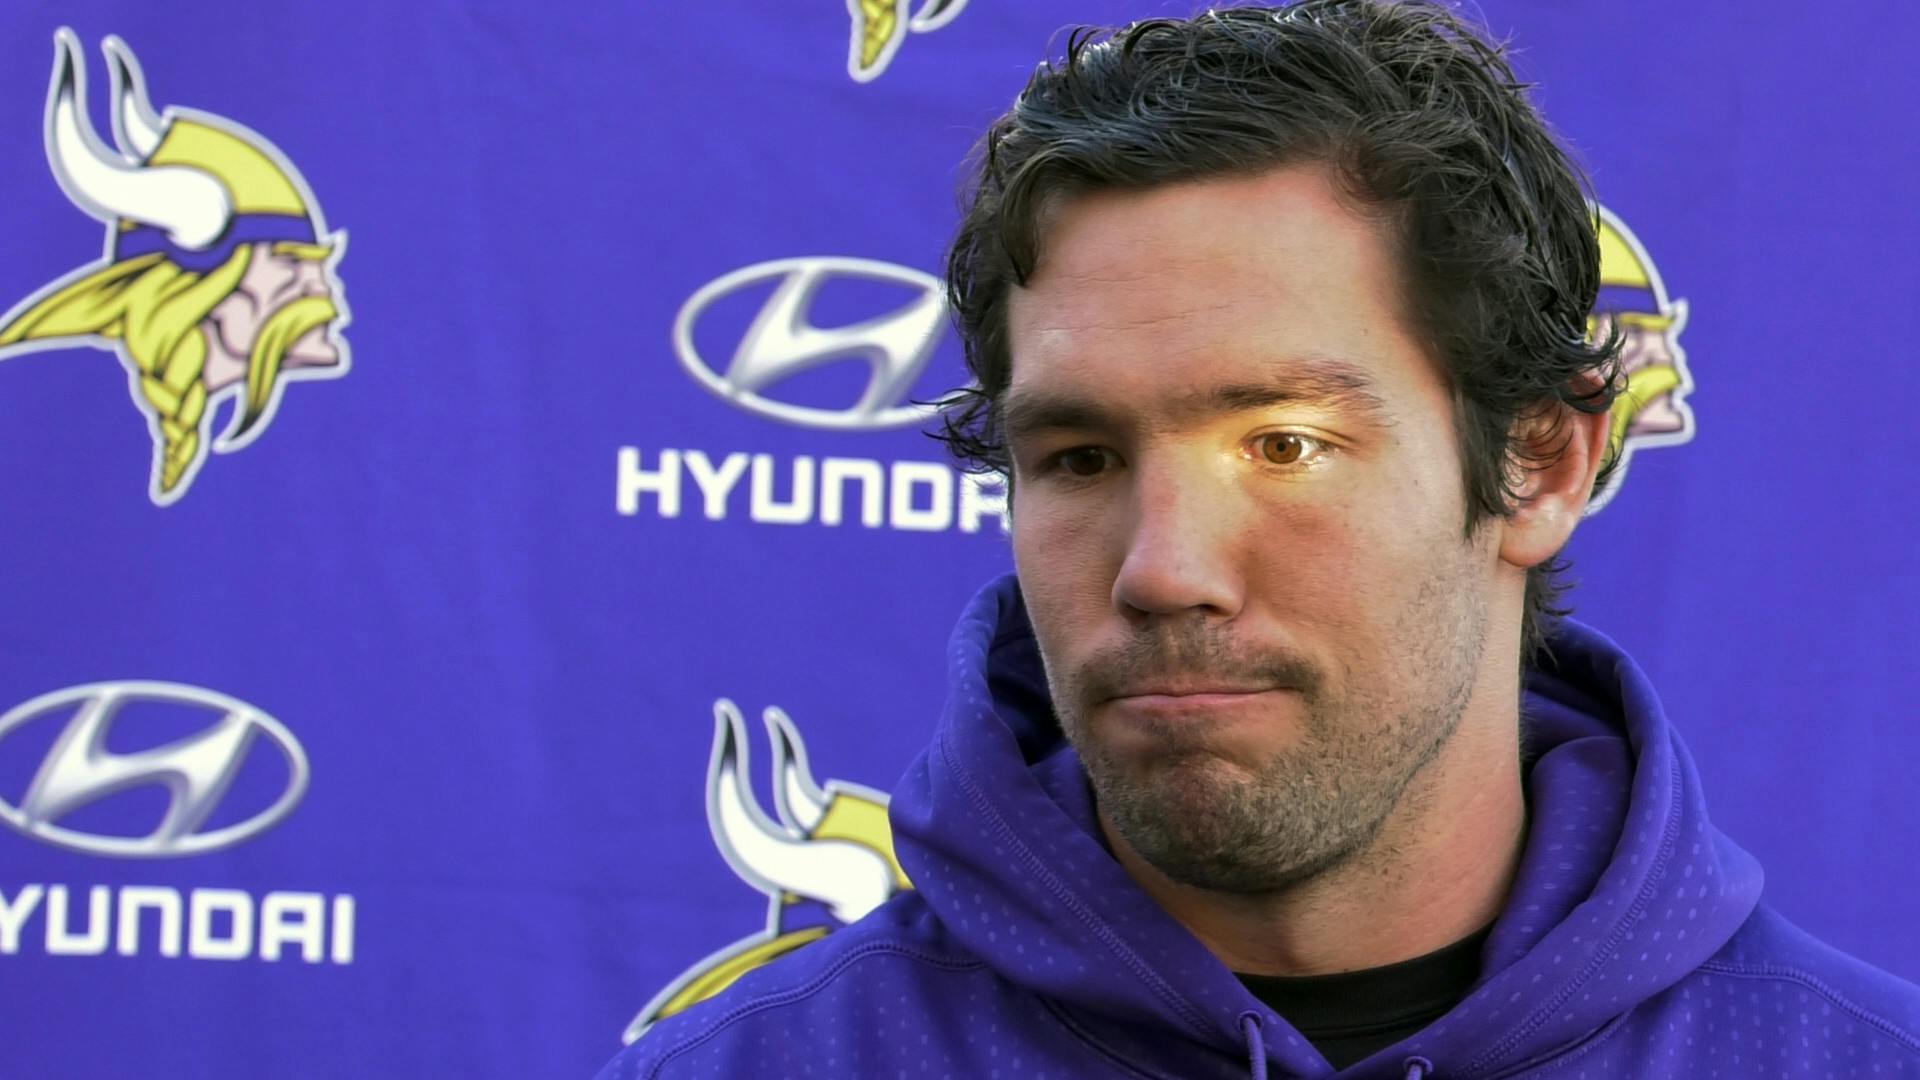 Coach Mike Zimmer and quarterback Sam Bradford were surprised to hear Vikings offensive coordinator Norv Turner decided to resign.